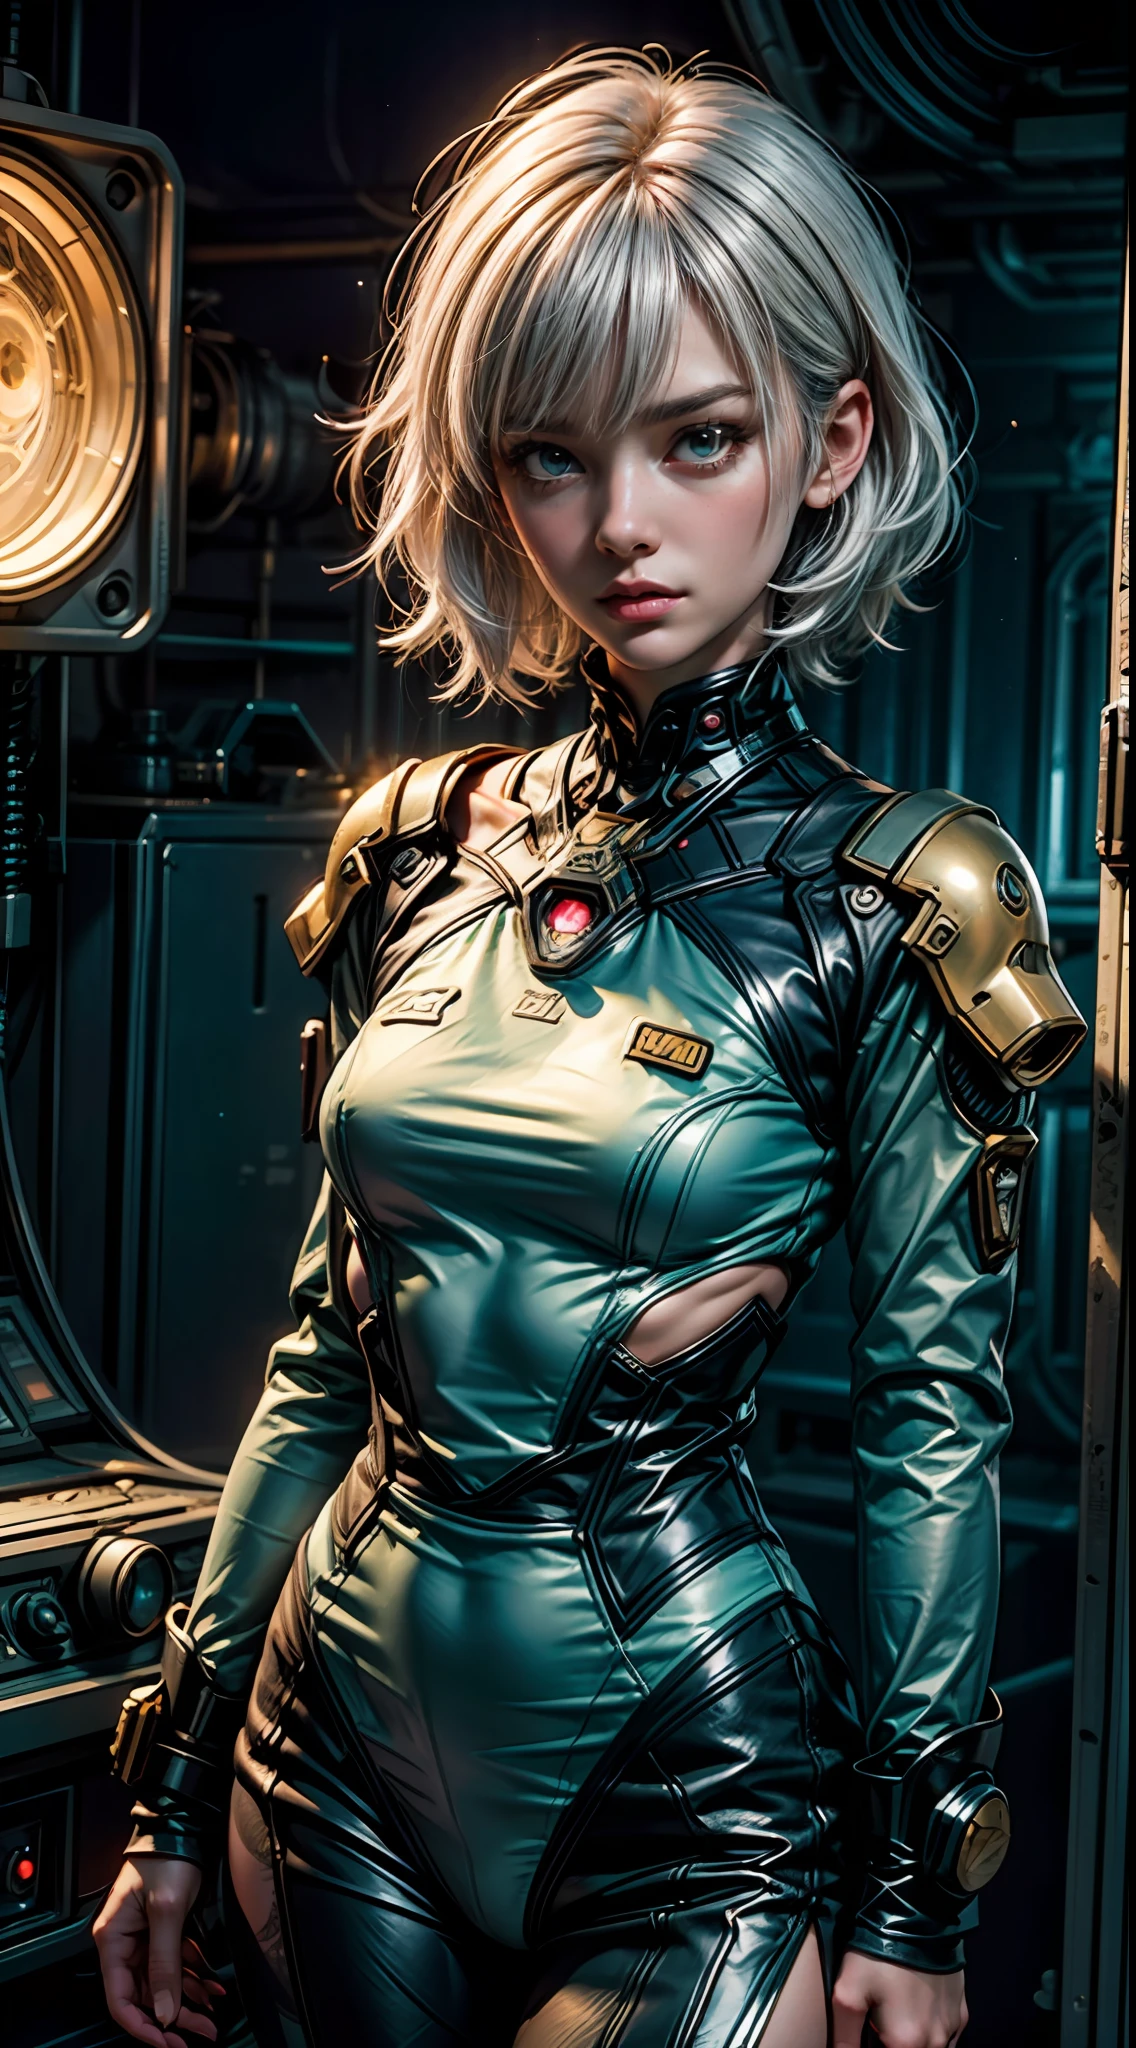 Female warrior monk with short white hair, Dress in a dark green long-sleeved shirt., Stand against a vintage sci-fi background. The artwork was inspired by Moebius and Ashley Wood.